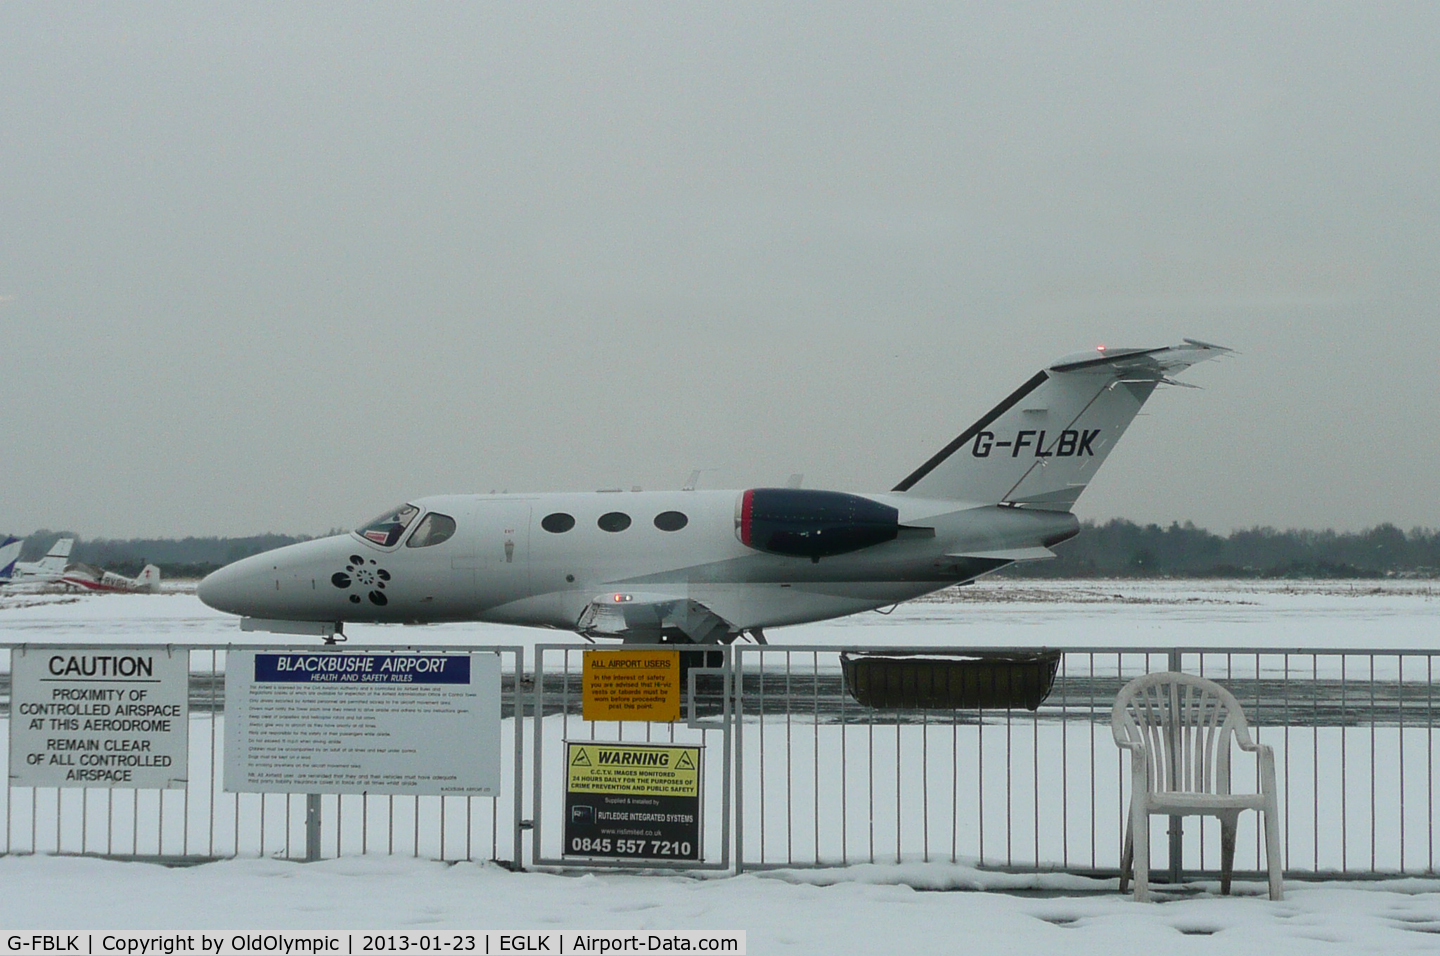 G-FBLK, 2007 Cessna 510 Citation Mustang Citation Mustang C/N 510-0027, G-FLBK Taxying to Maintenance area during airport snow closure